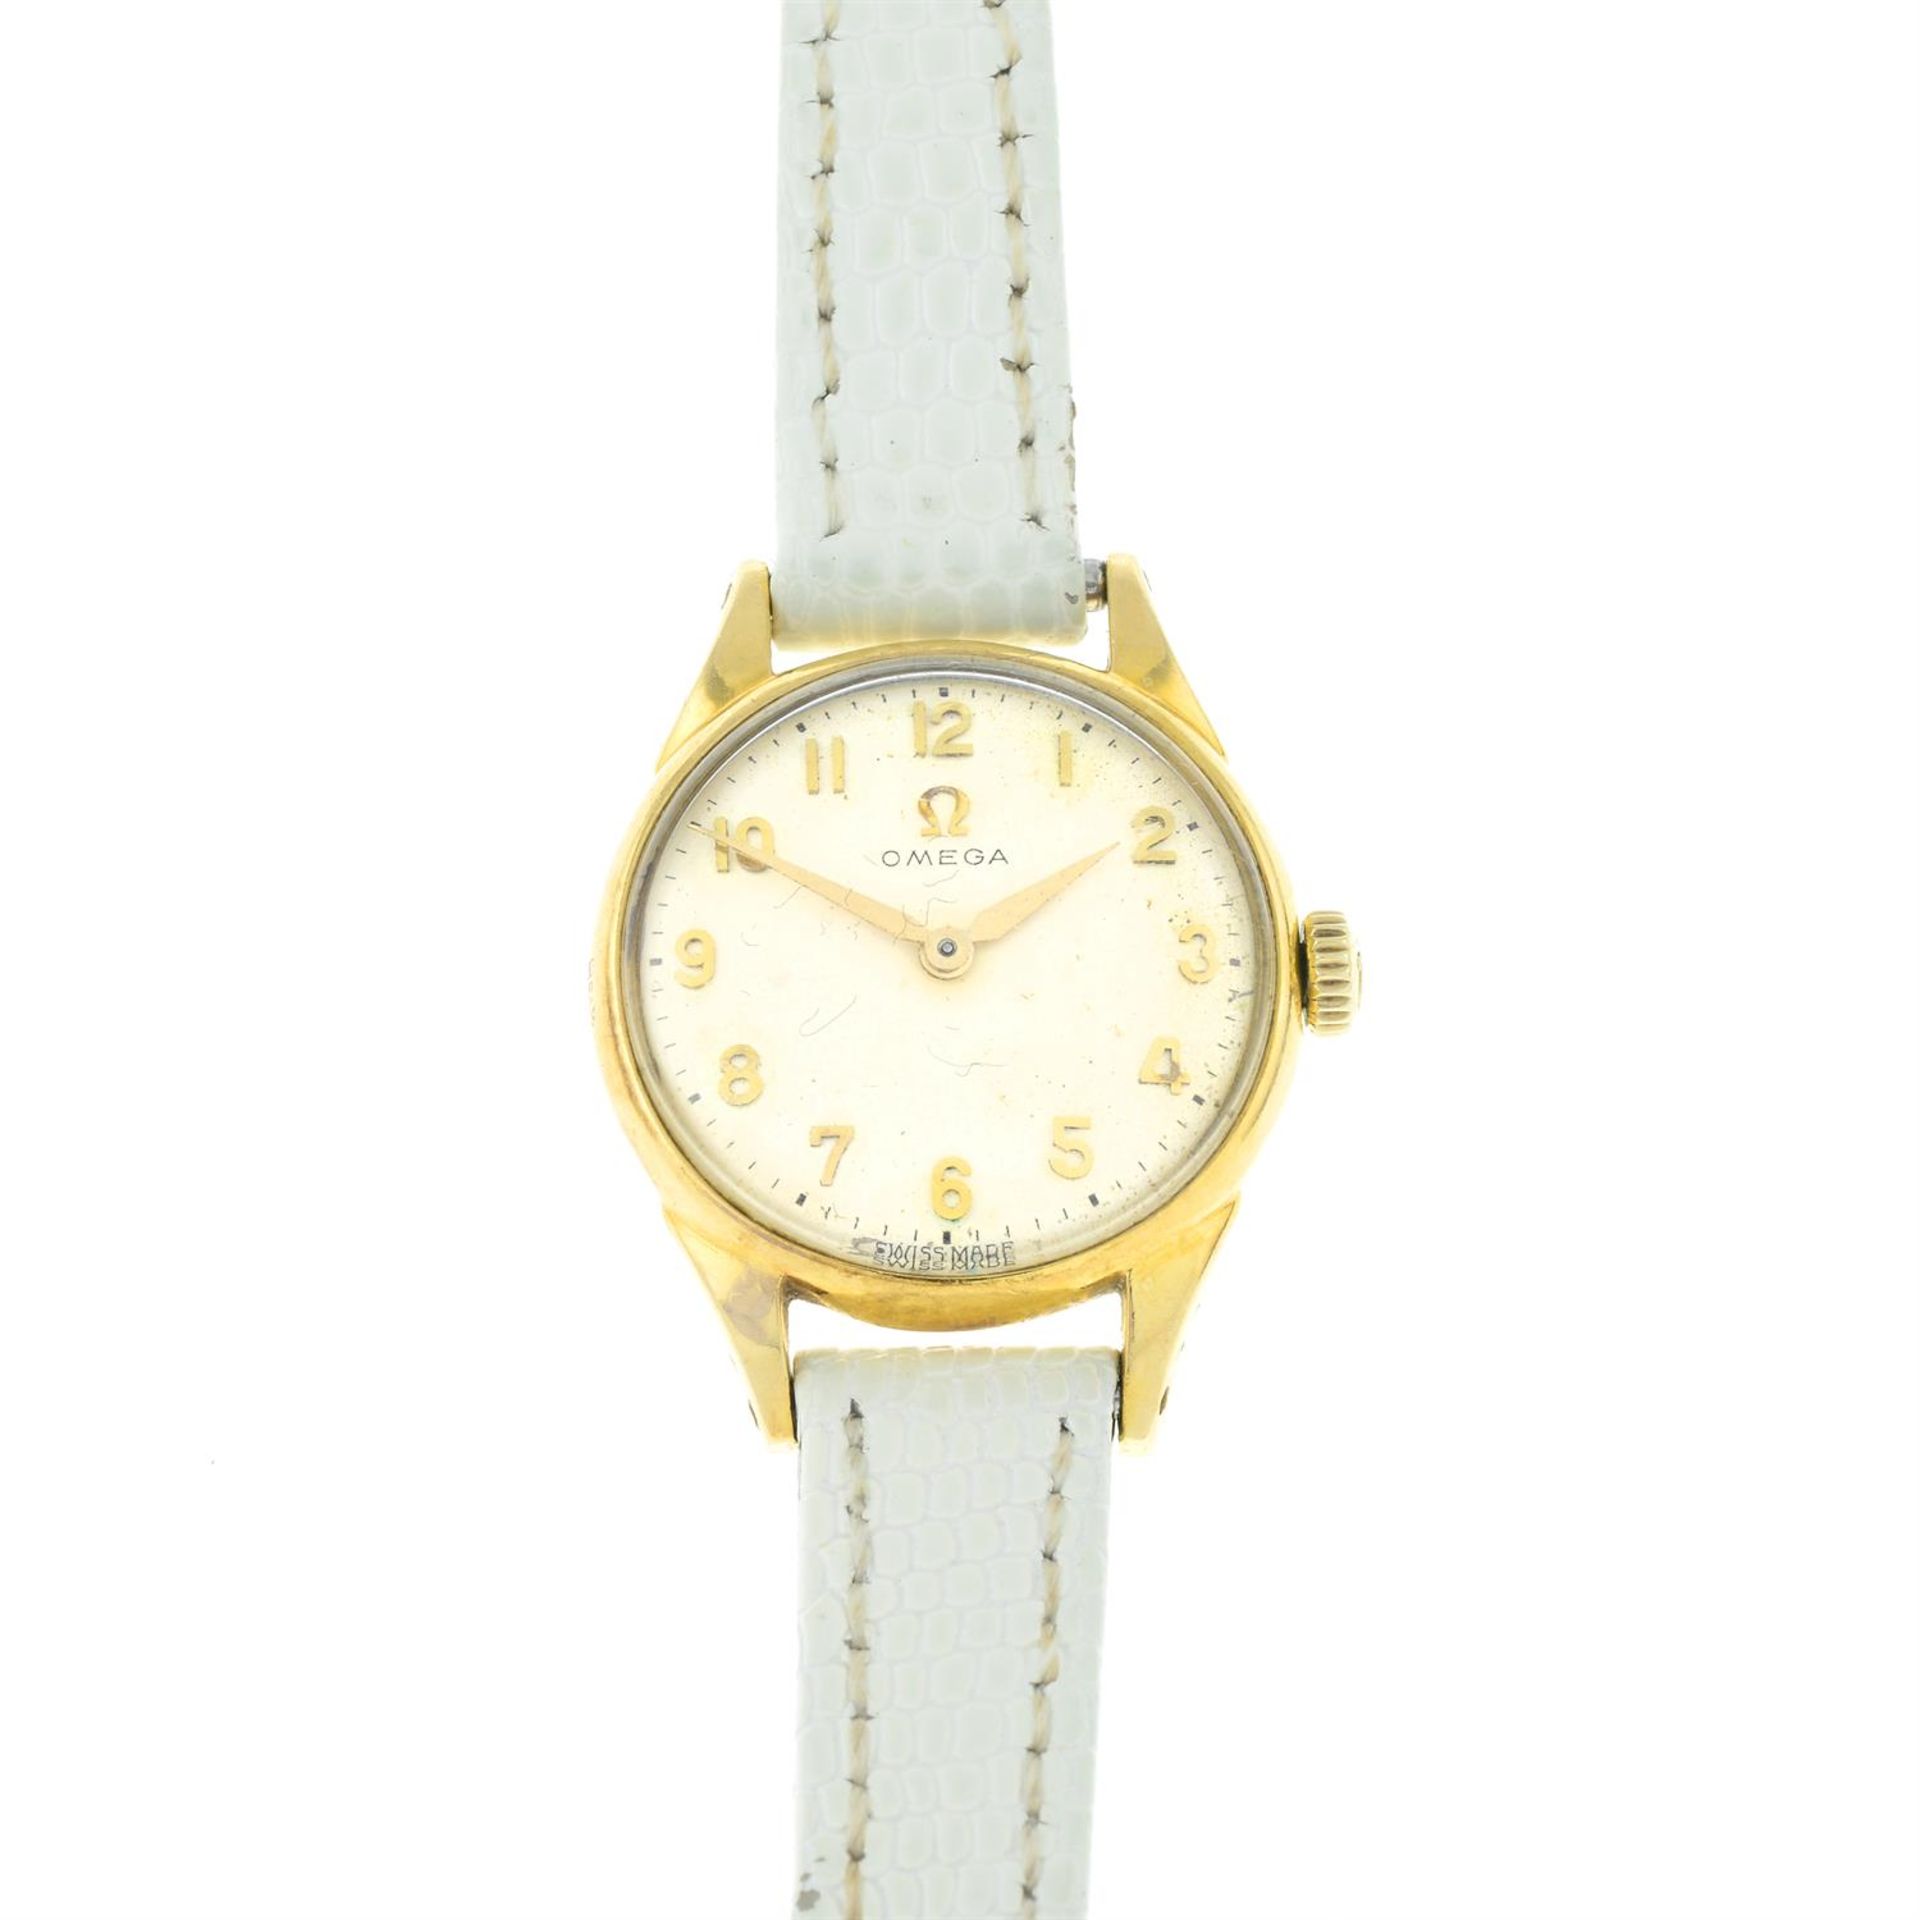 A ladies wristwatch, with white leather strap, by Omega.